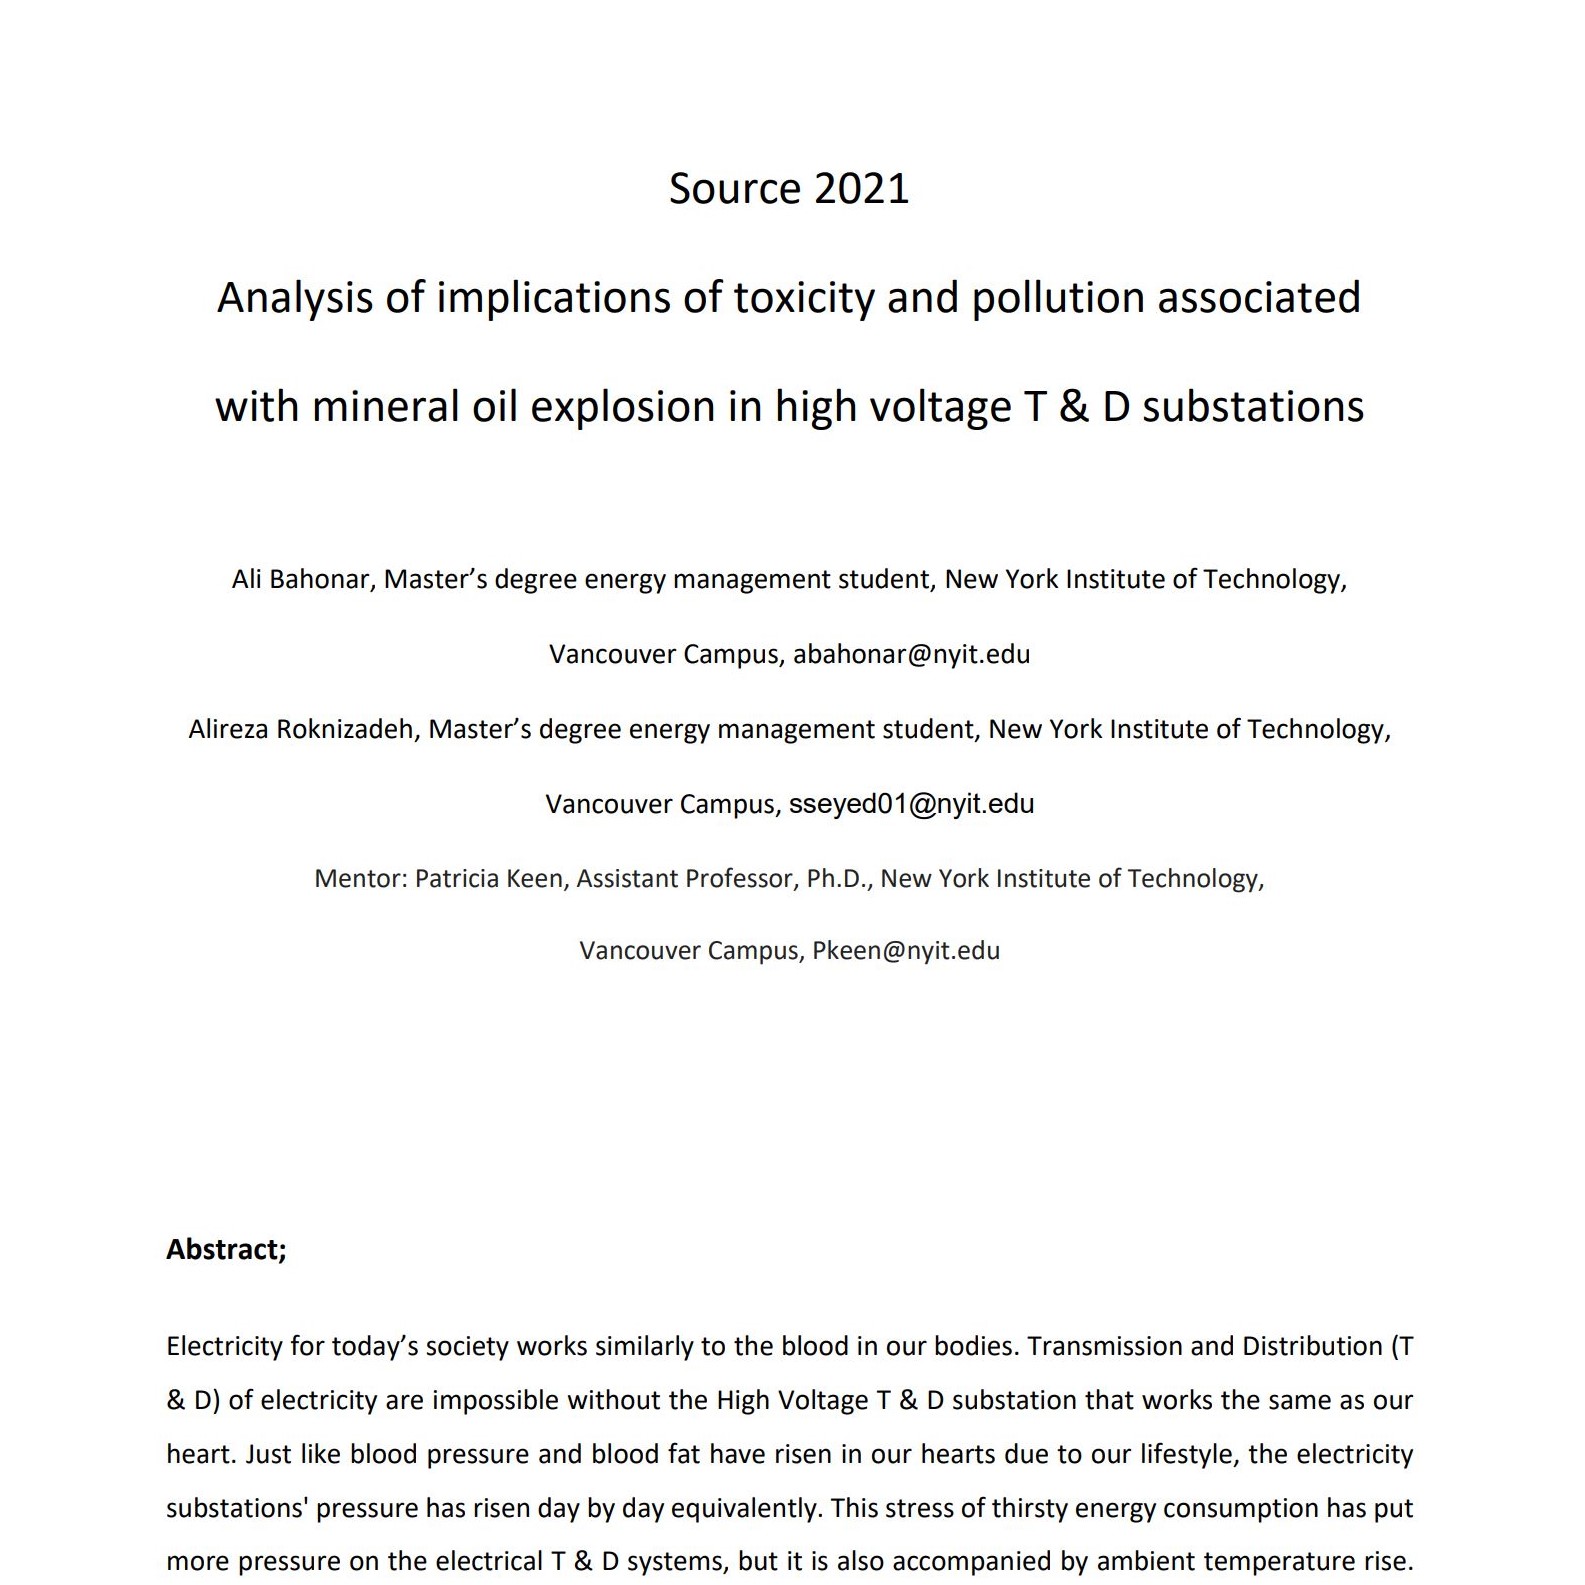 Analysis of Implications of Toxicity and Pollution Associated with Mineral Oil Explosion in High Voltage T & D Substations